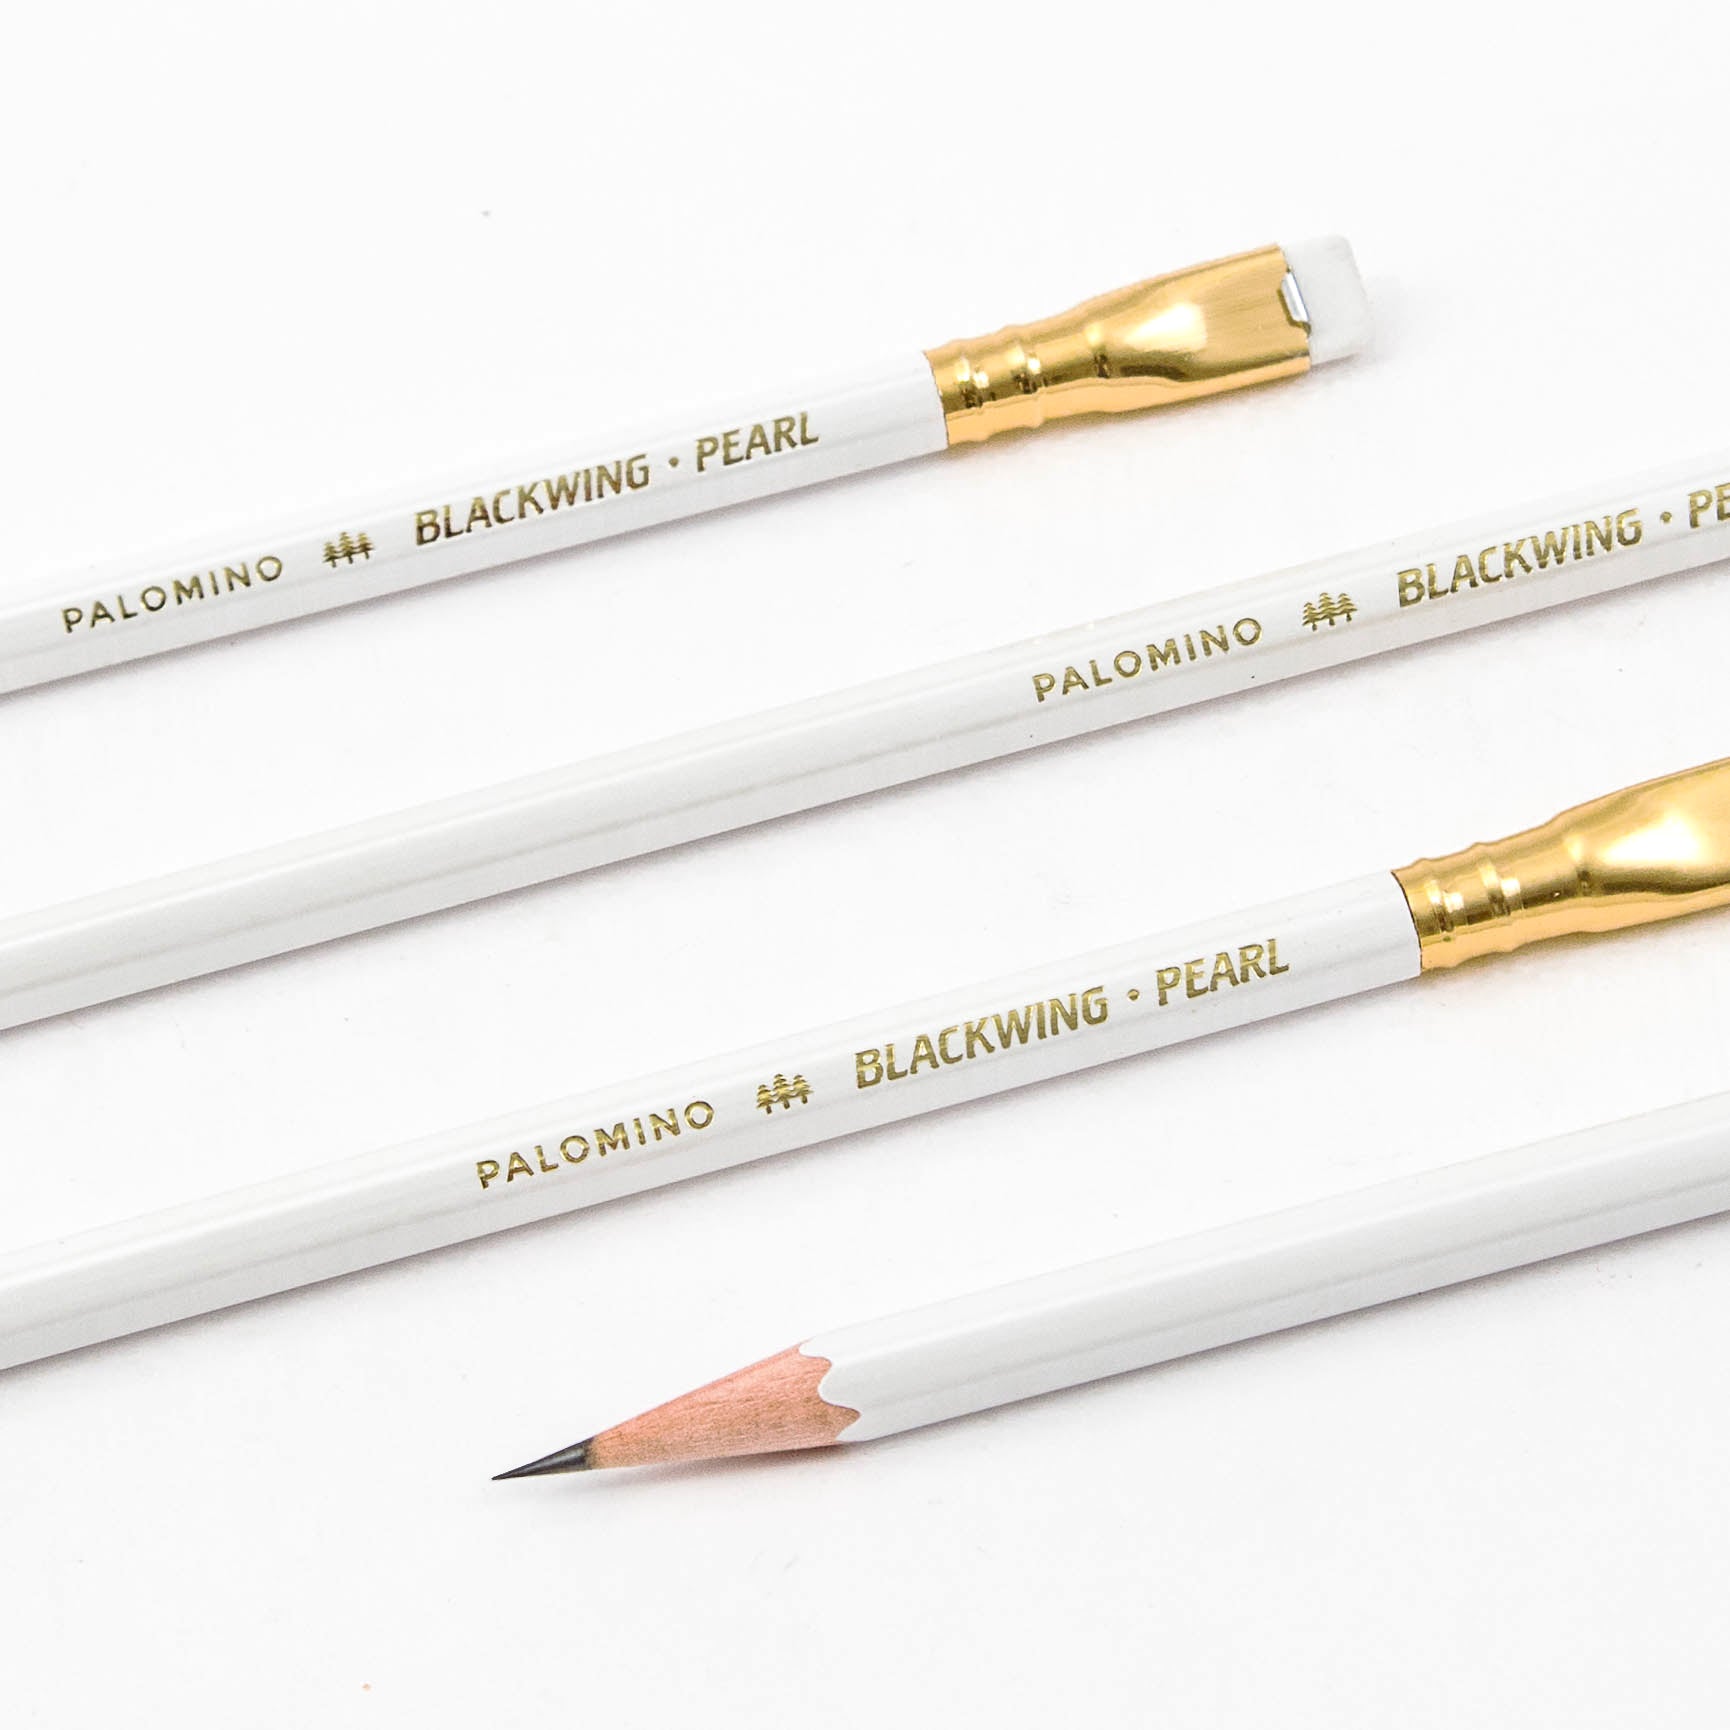 Blackwing Palomino Pearl | White | Single Limited Edition Graphite Pencil with Eraser | by Blackwing - Lifestory - Blackwing